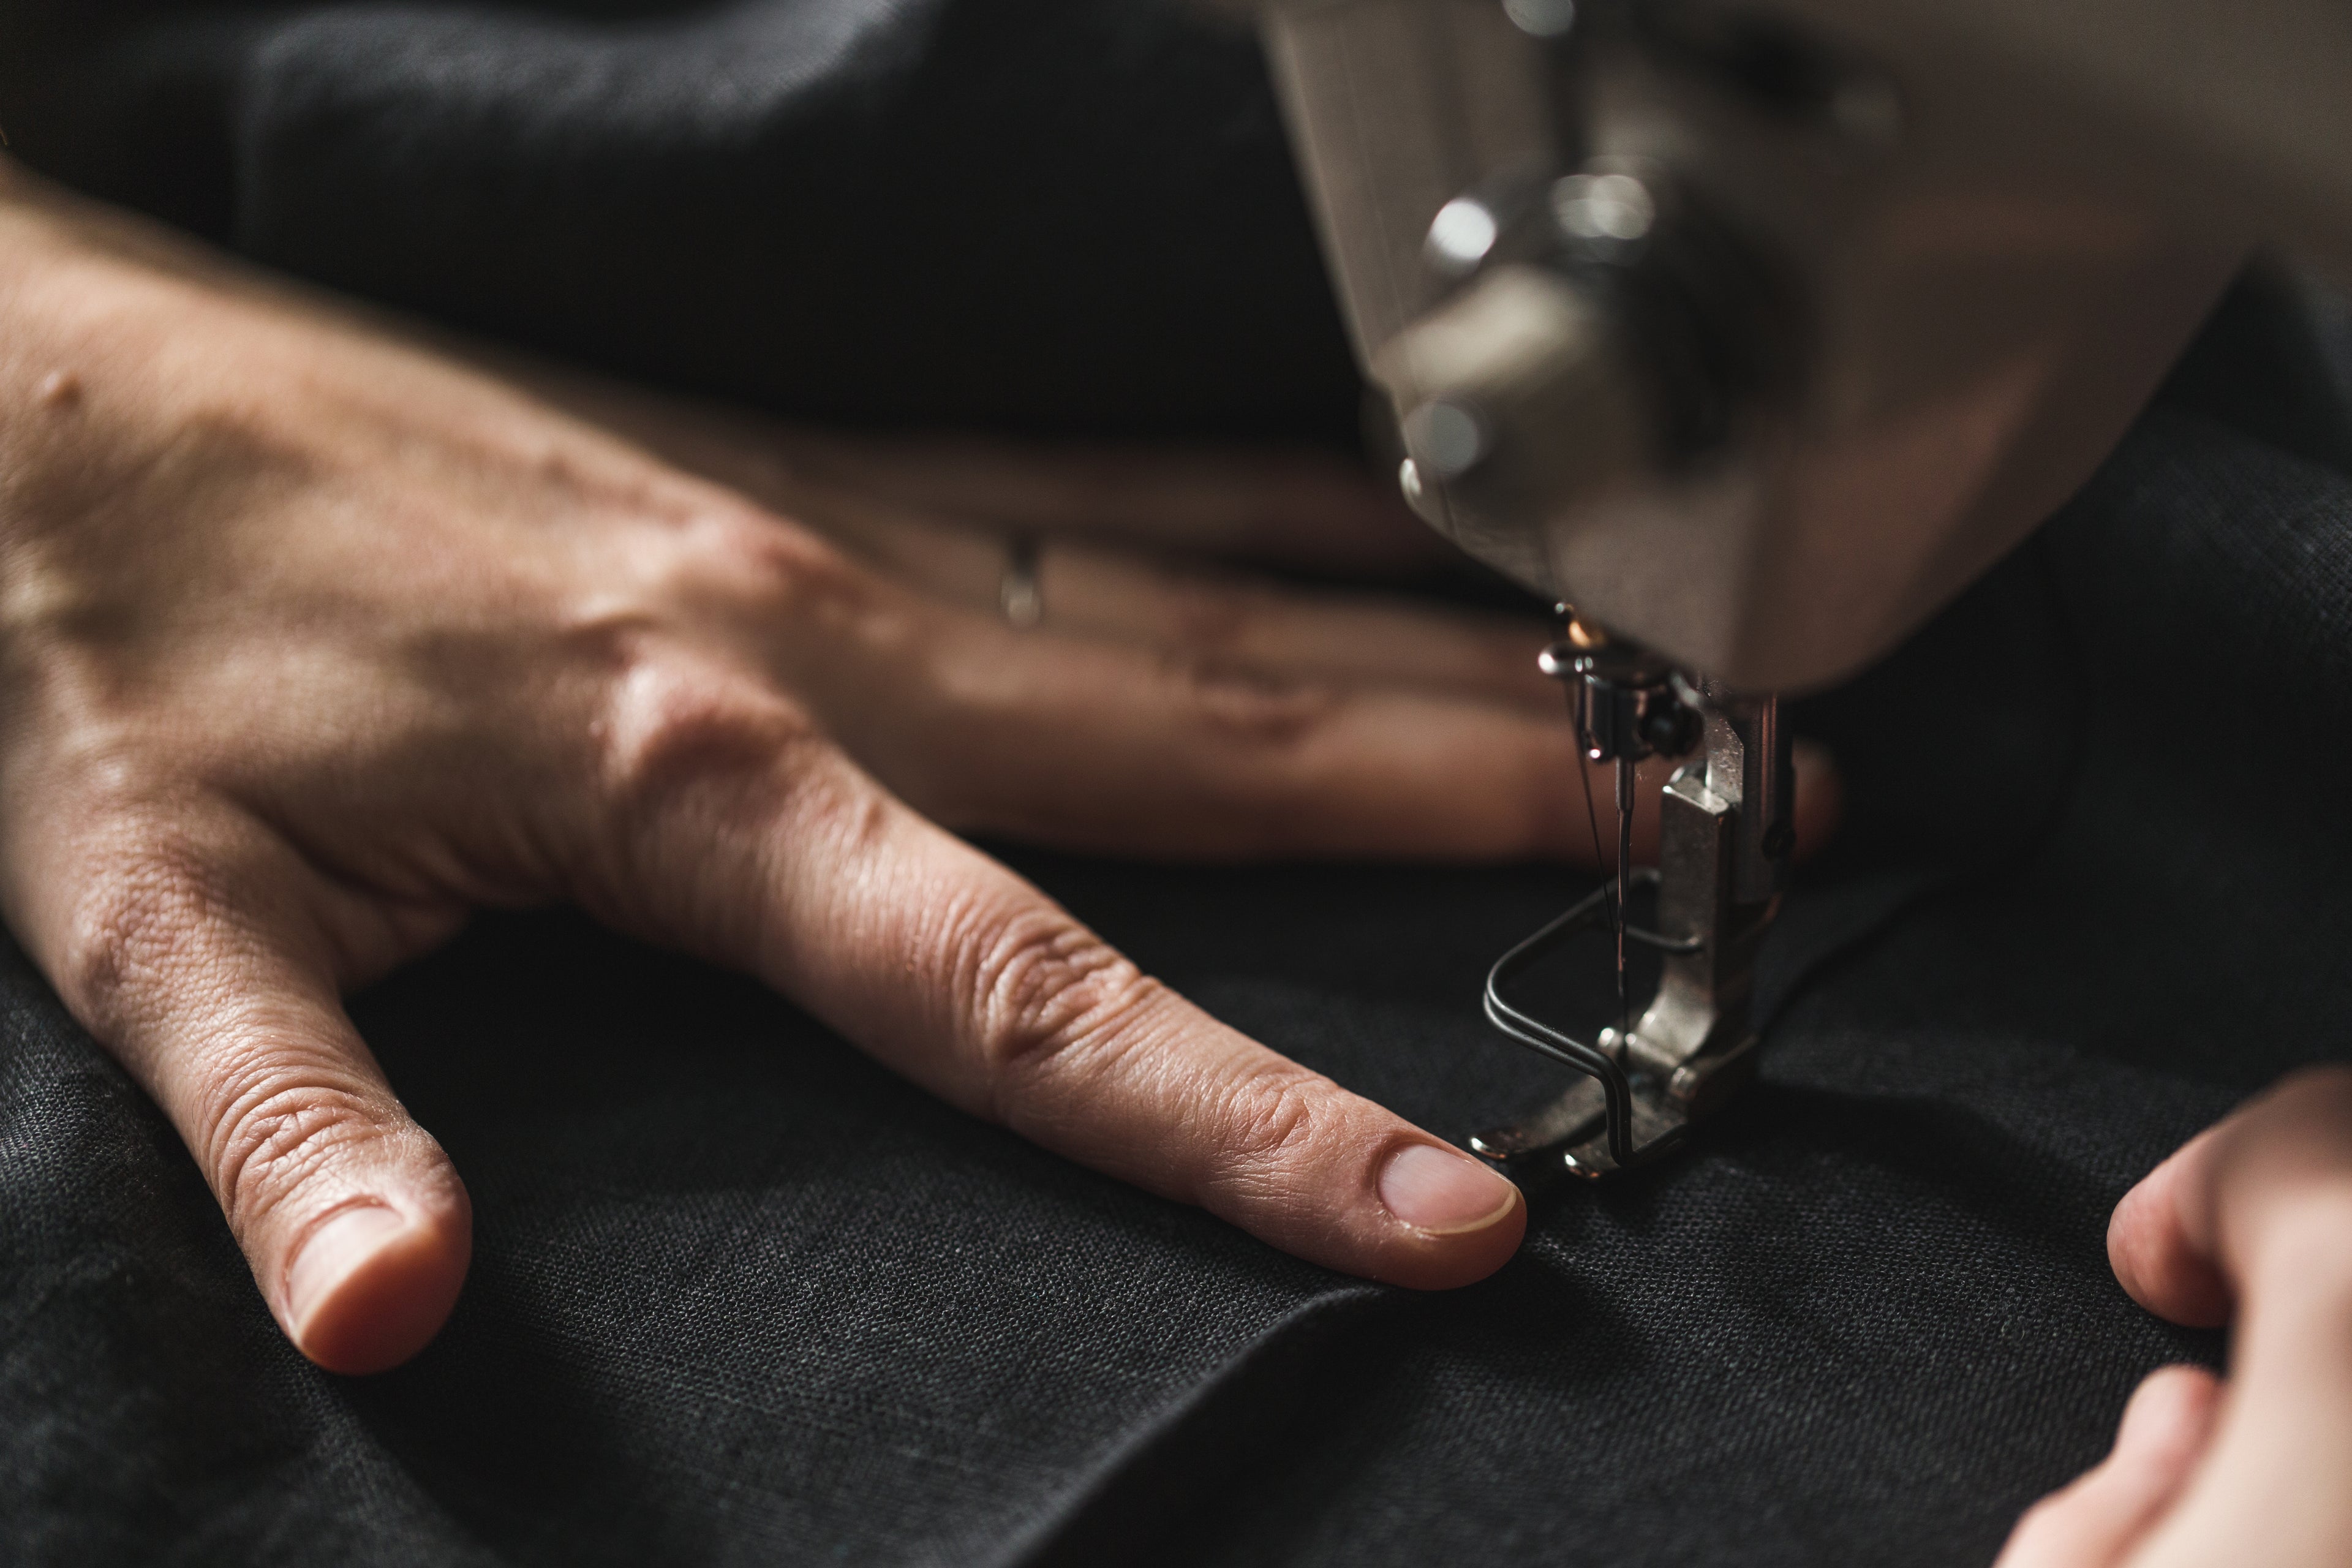 black-fabric-in-sewing-machine - SuitGamer